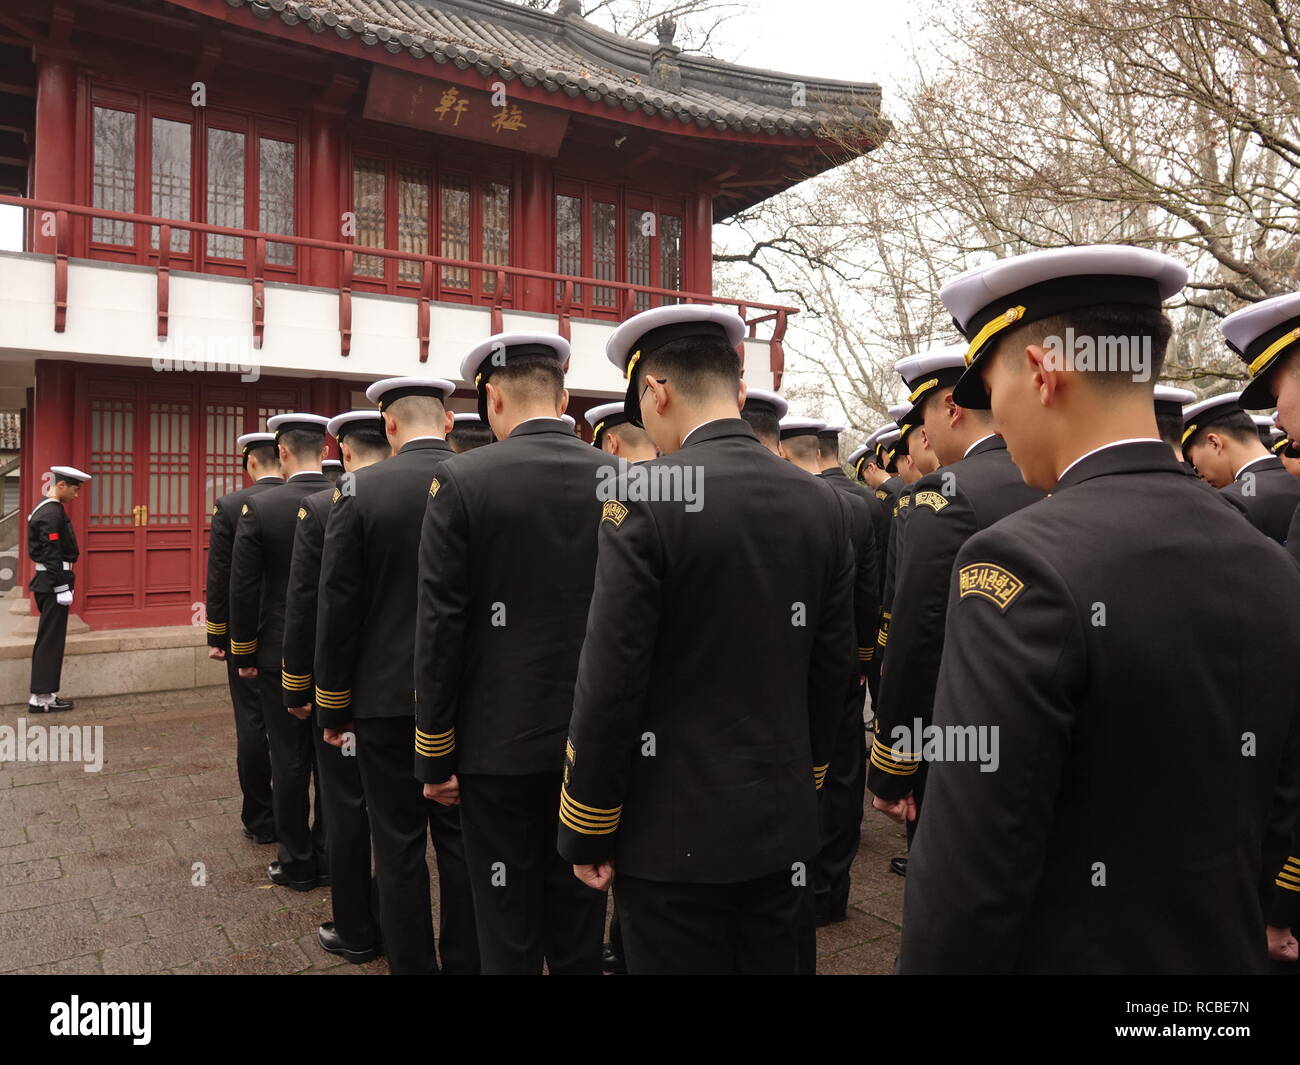 15th Jan, 2019. S. Korean naval cadets in Shanghai Cadets from South Korea's Naval Academy offer a silent prayer at a memorial for Korean independence activist Yoon Bong-gil inside Lu Xun Park in Shanghai on Jan. 15, 2019, to pay tribute to Yoon. The cadets arrived in the Chinese city the previous day as part of their overseas training tour. Yoon threw explosives at Japanese Emperor Hirohito in 1932, when he was visiting the Shanghai park to celebrate his birthday. Credit: Yonhap/Newcom/Alamy Live News Stock Photo